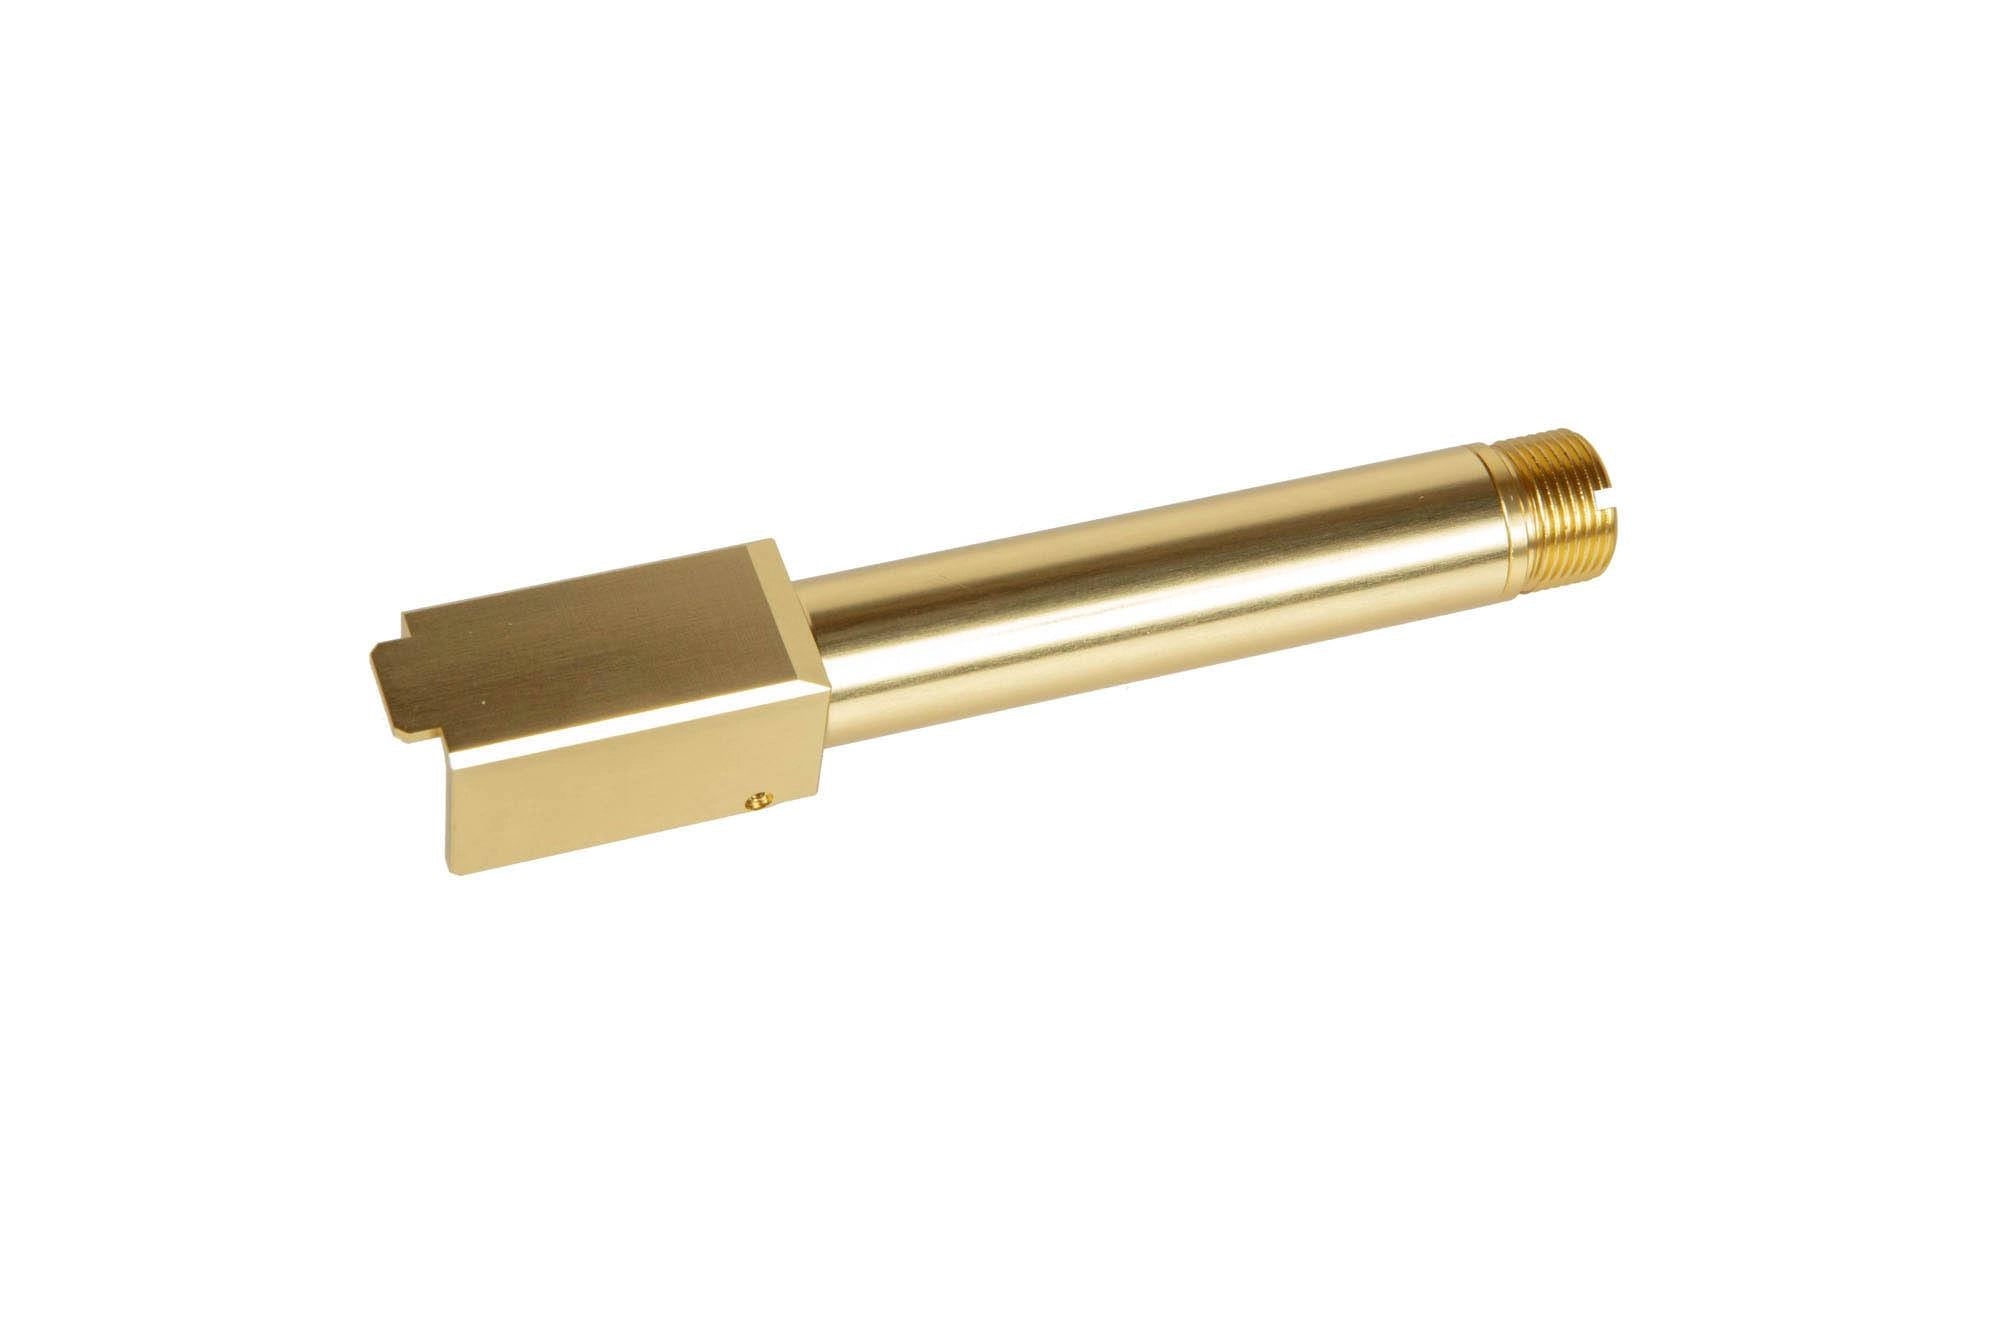 Non-Recoiling "2 Way Fixed" Outer Barrel for Umarex Glock 19X Replicas - Gold